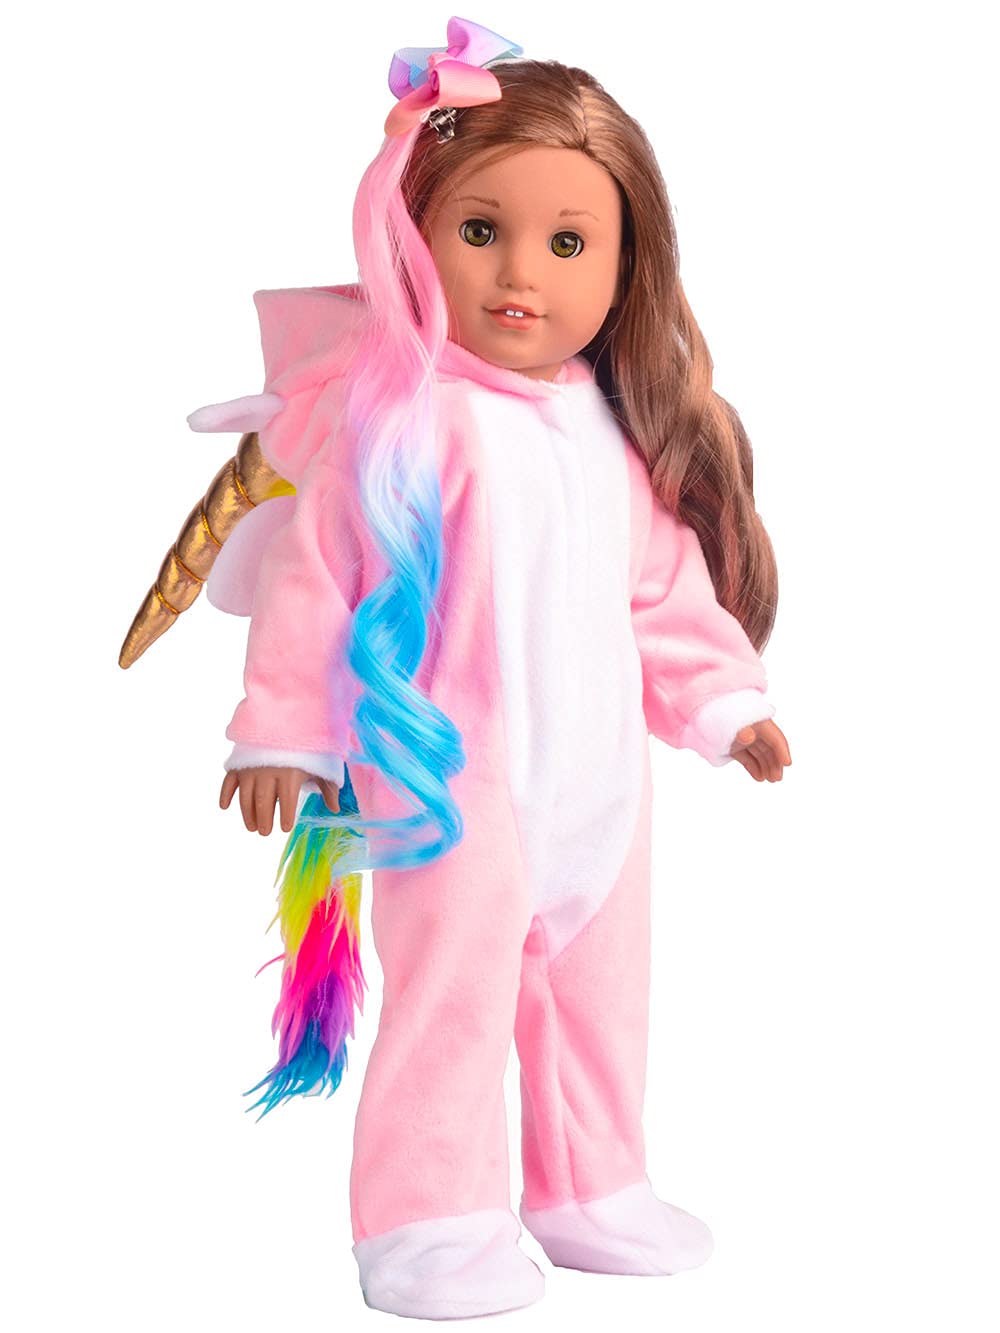 Sweet Dolly Doll Clothes Unicorn Costume Onesie Pajamas Rainbow Color Hair Bow Clips Fits 18 Inch American Girl Doll